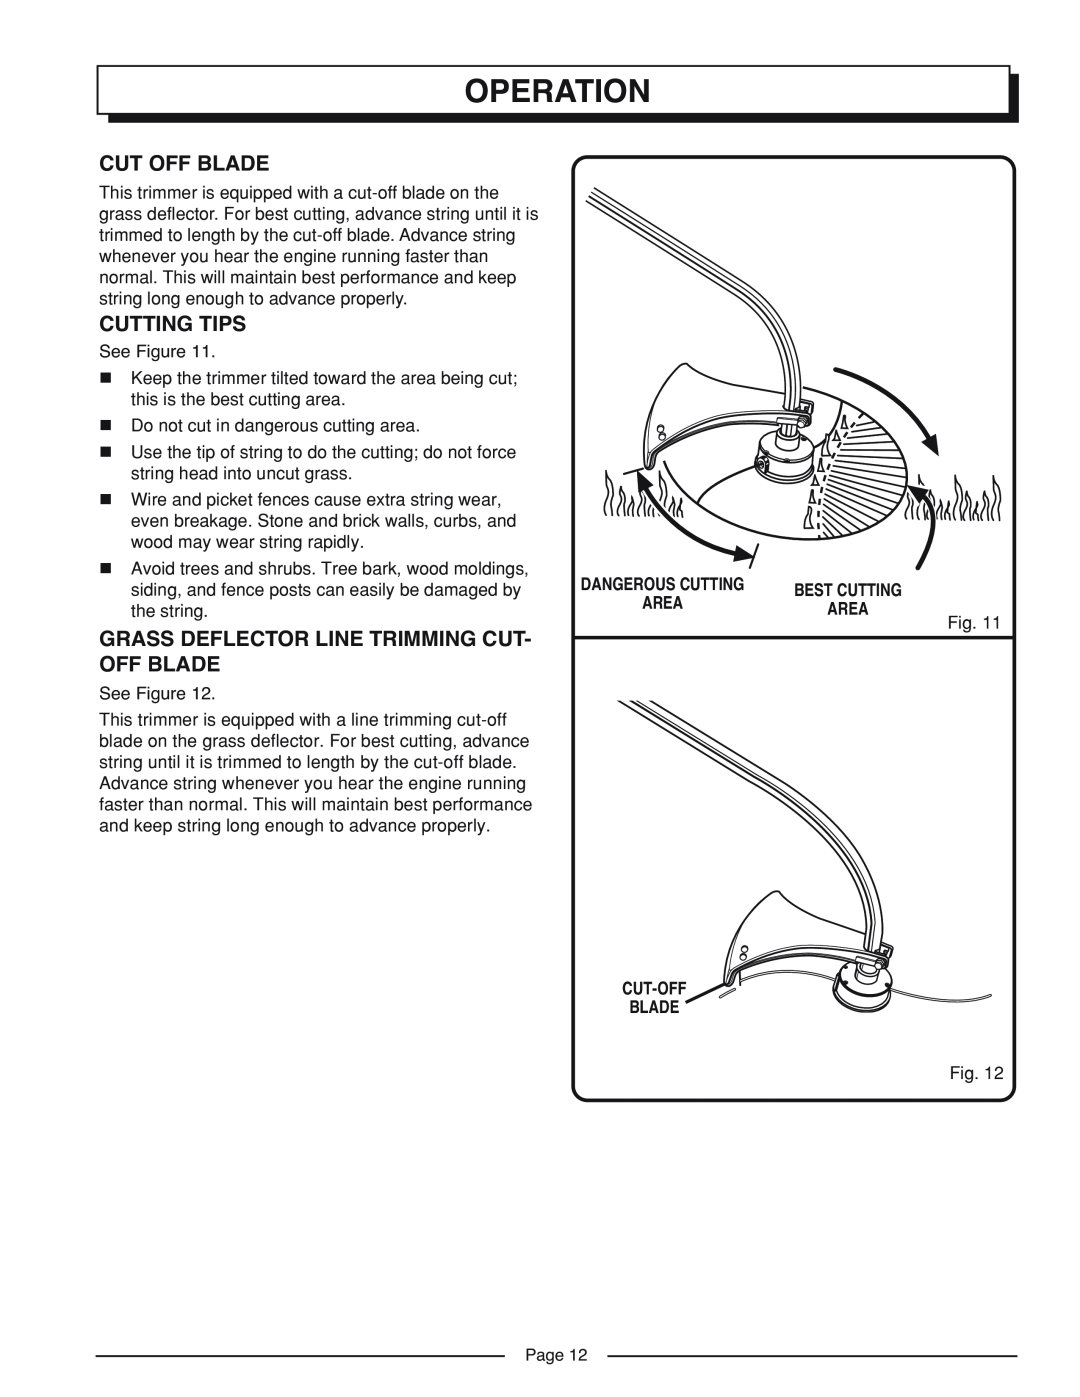 Homelite UT41002A Cut Off Blade, Grass Deflector Line Trimming Cut- Off Blade, Operation, Cutting Tips, See Figure, Page 